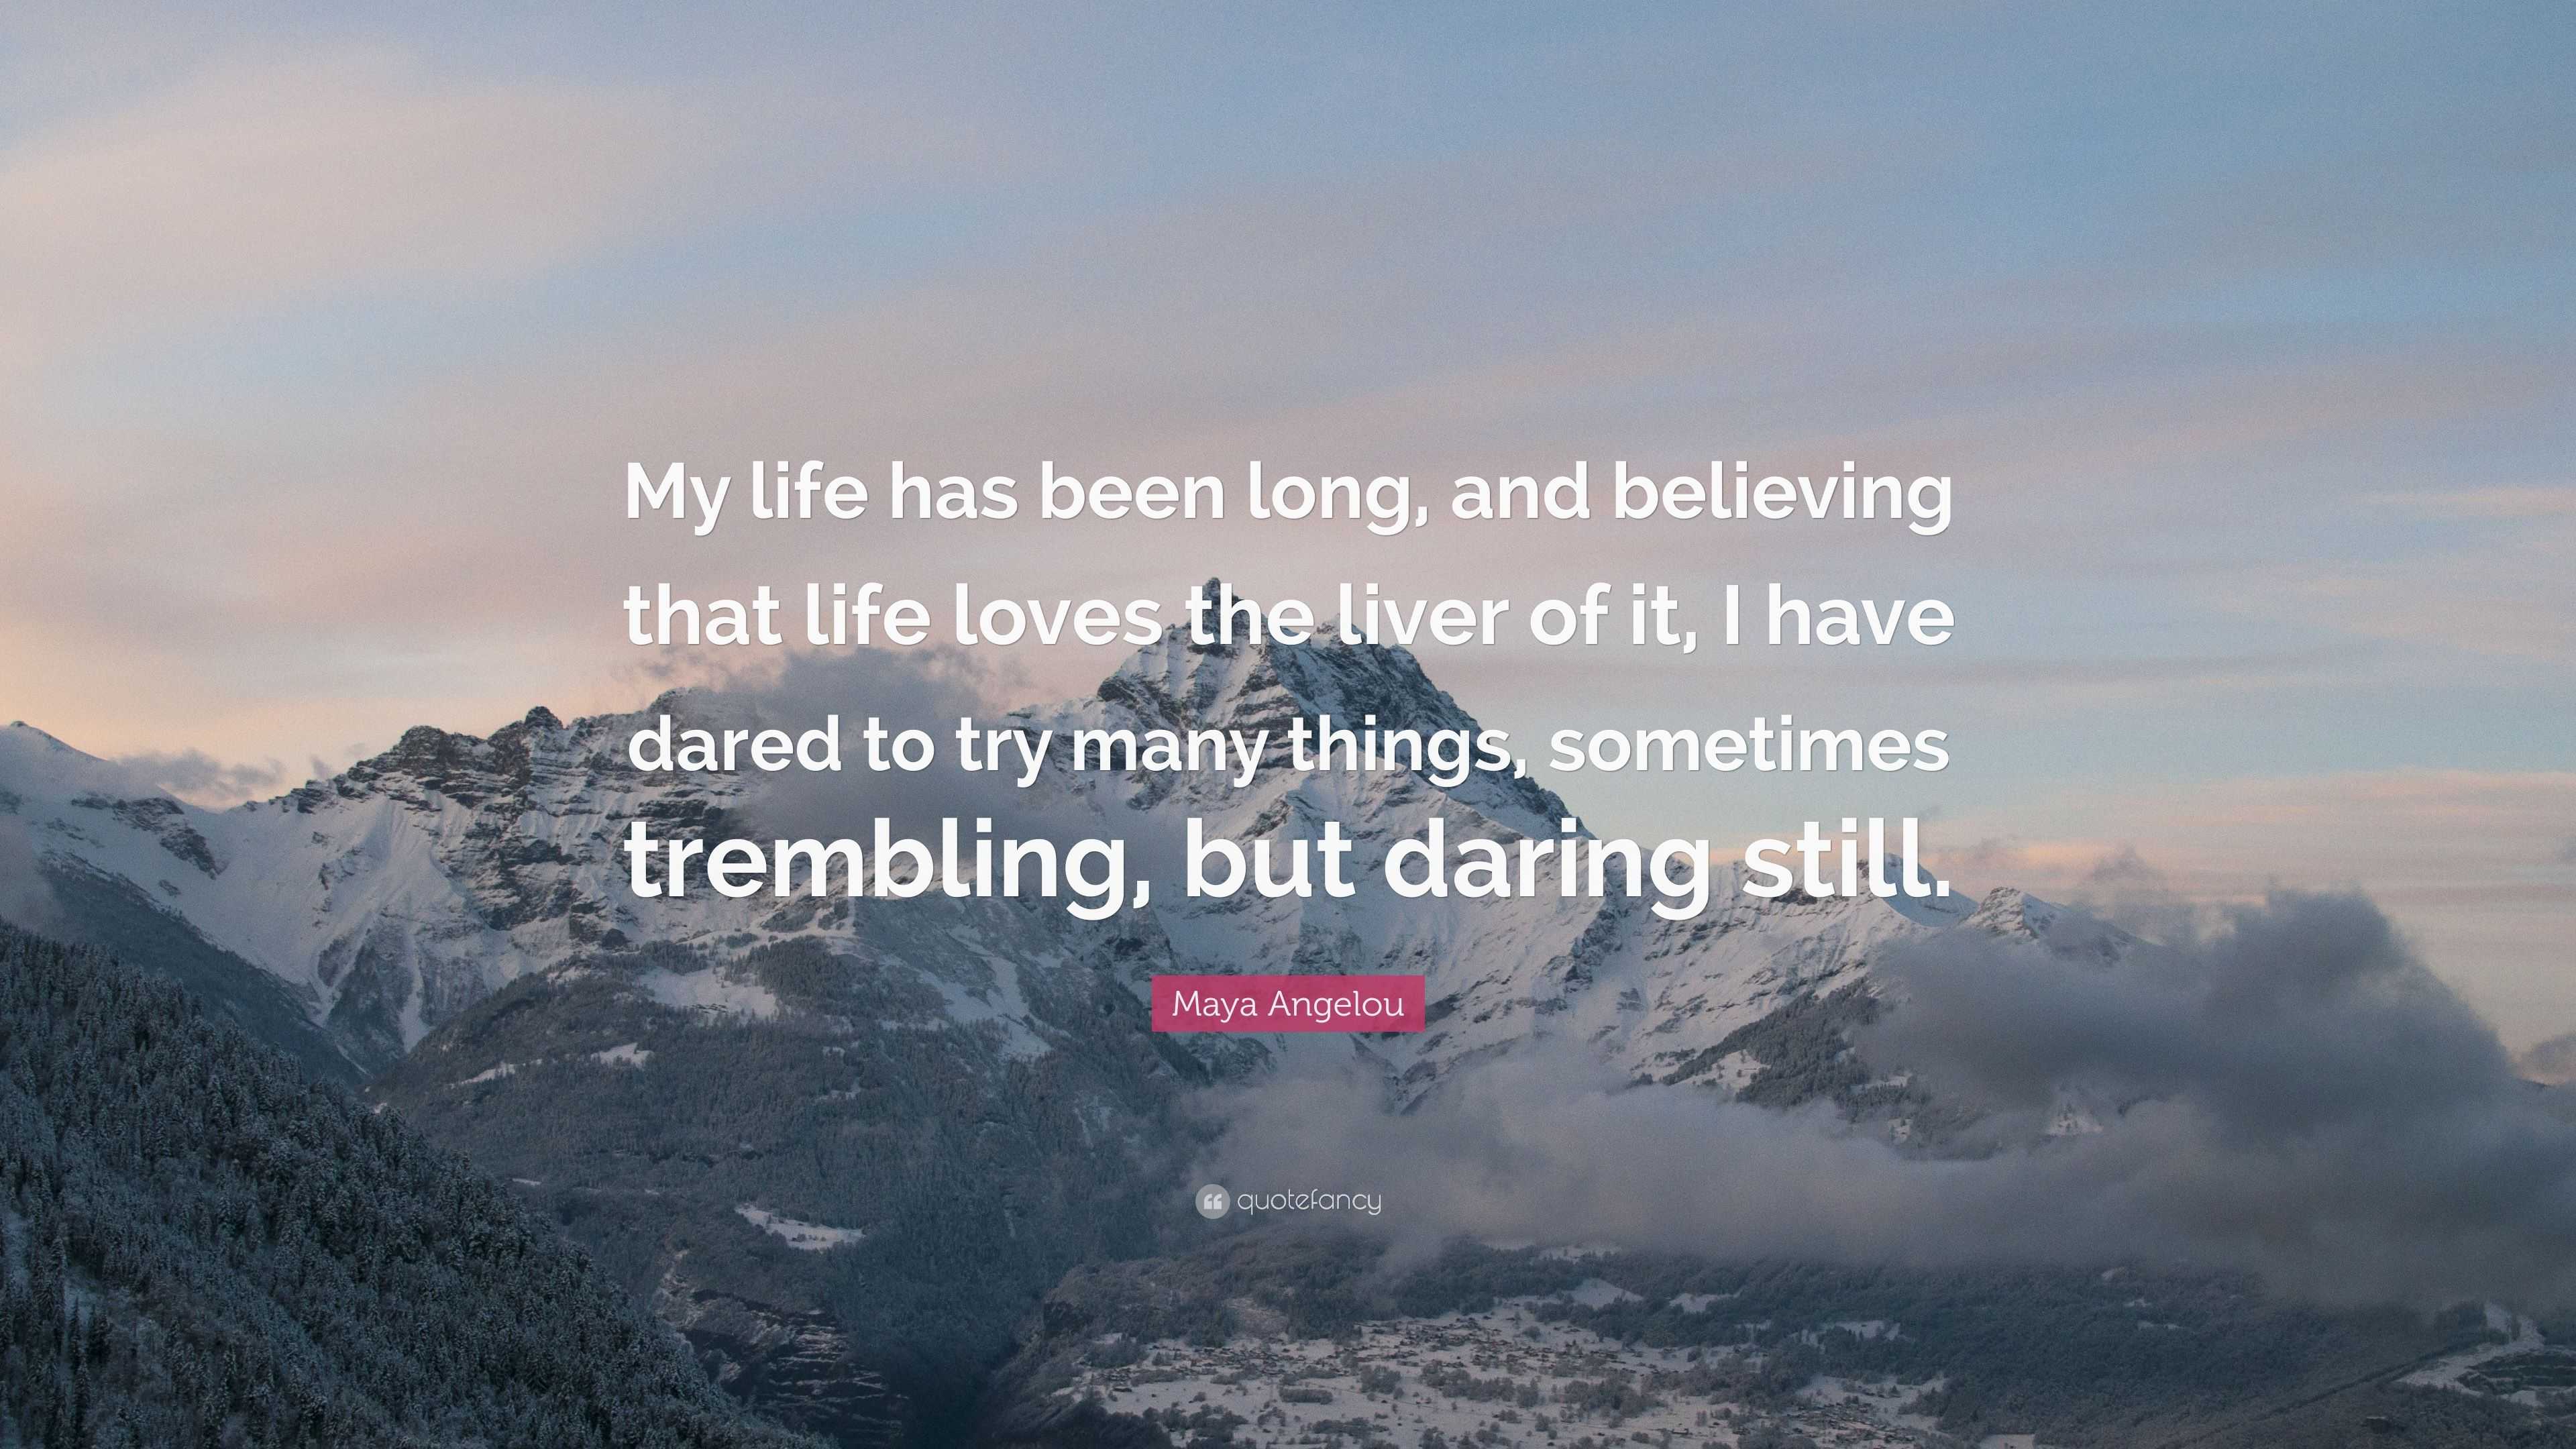 Maya Angelou Quote: “My life has been long, and believing that life ...